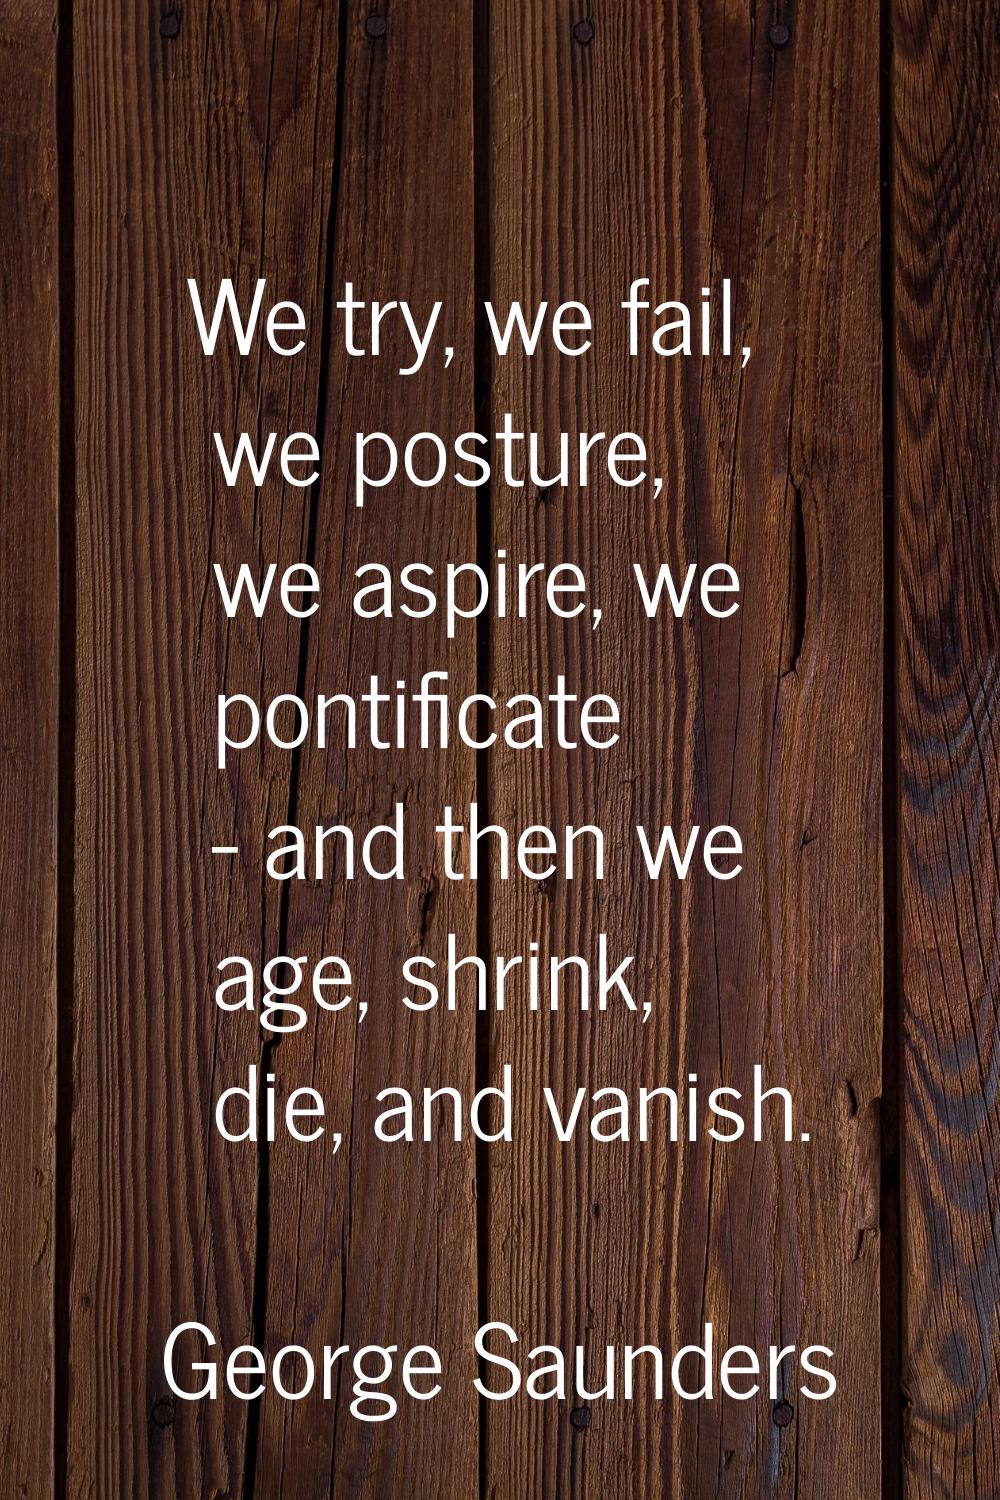 We try, we fail, we posture, we aspire, we pontificate - and then we age, shrink, die, and vanish.